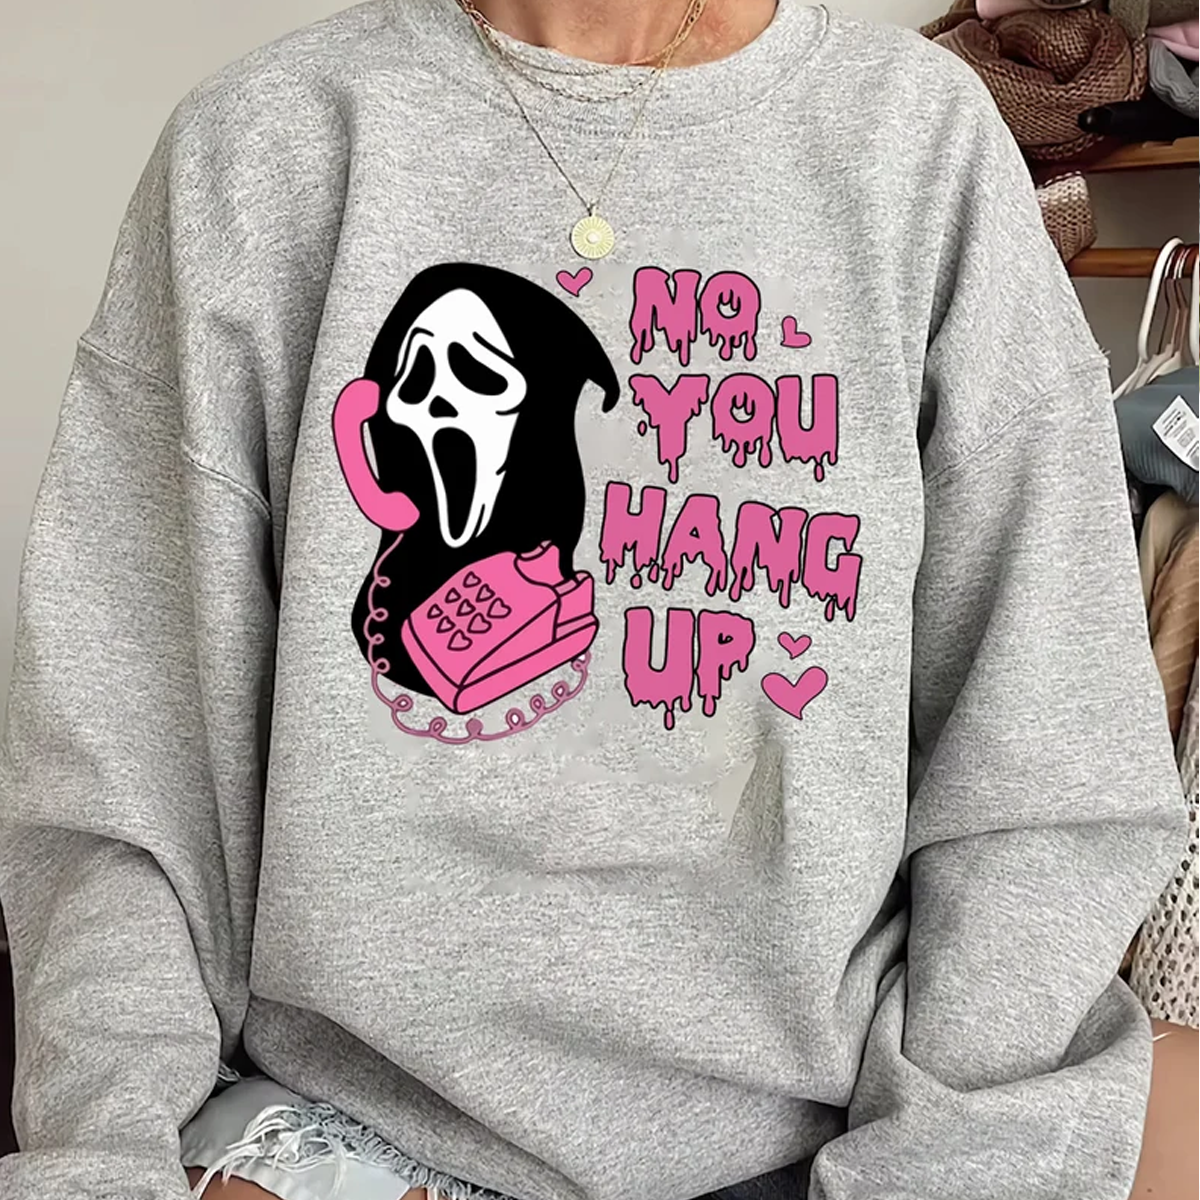 No You Hang Up - Ghostface Halloween Sweater! Kids & Adult sizes